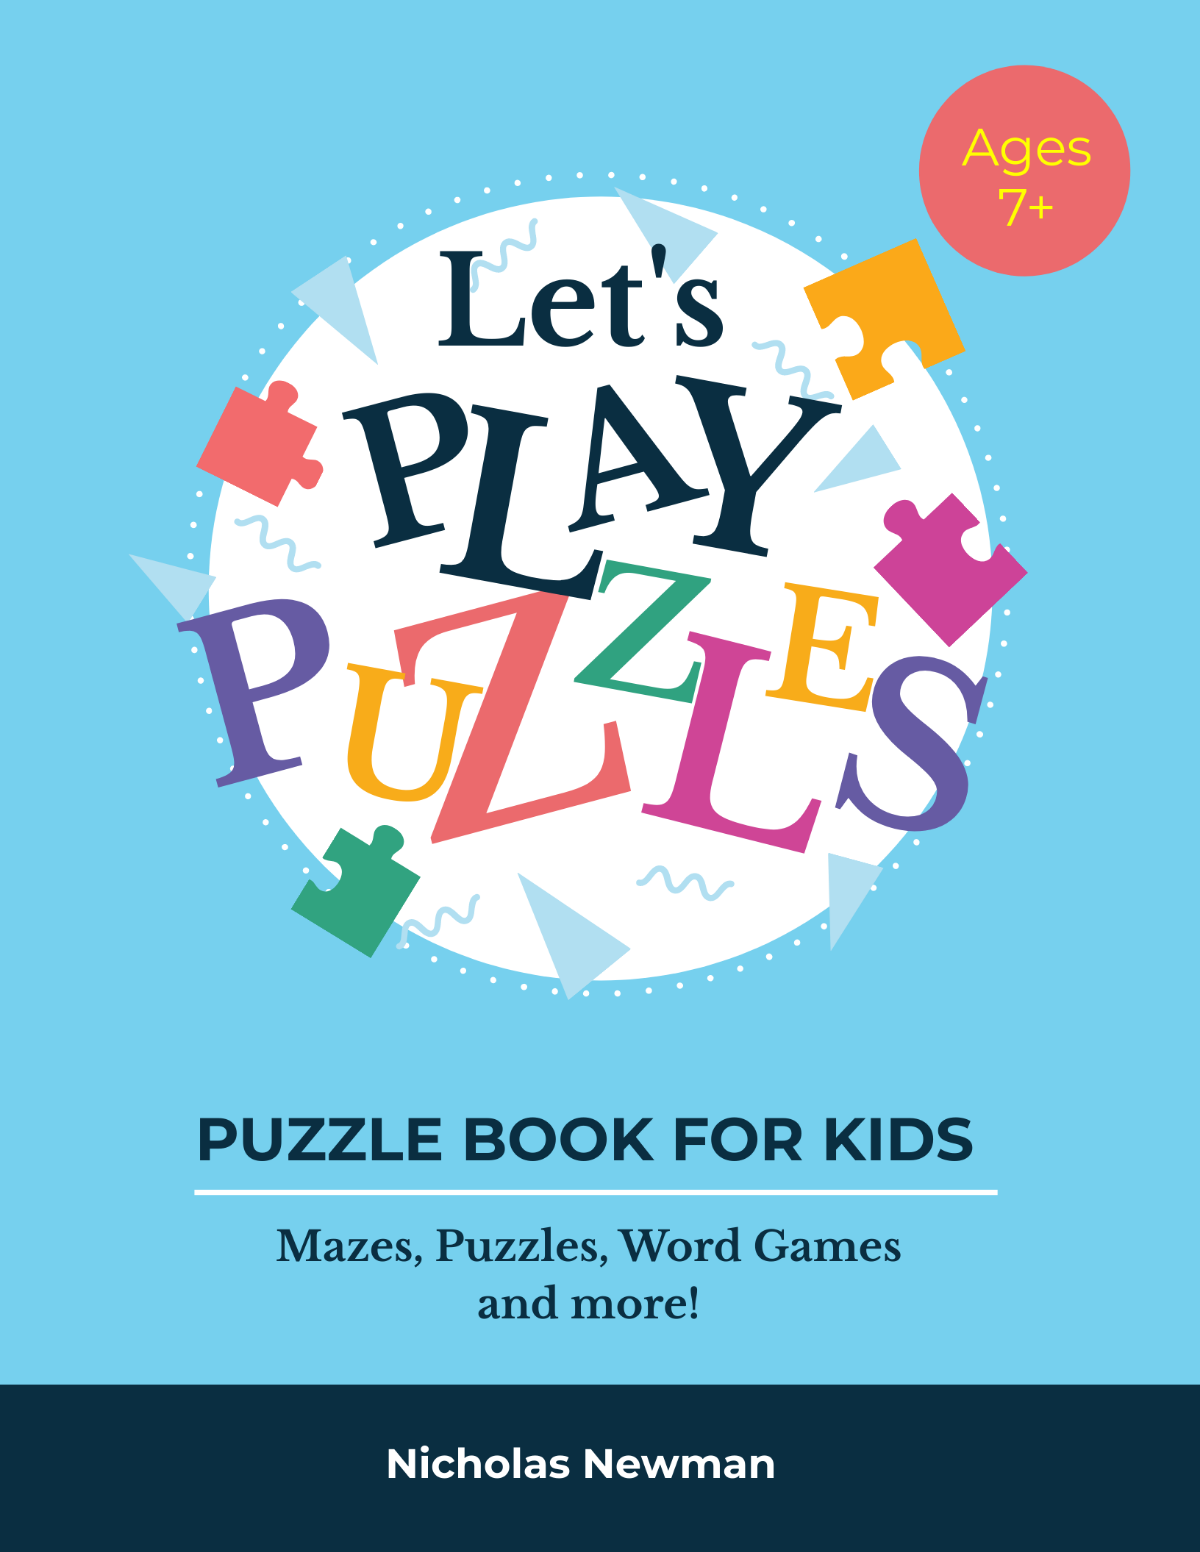 Kid's Puzzle Book Cover Template